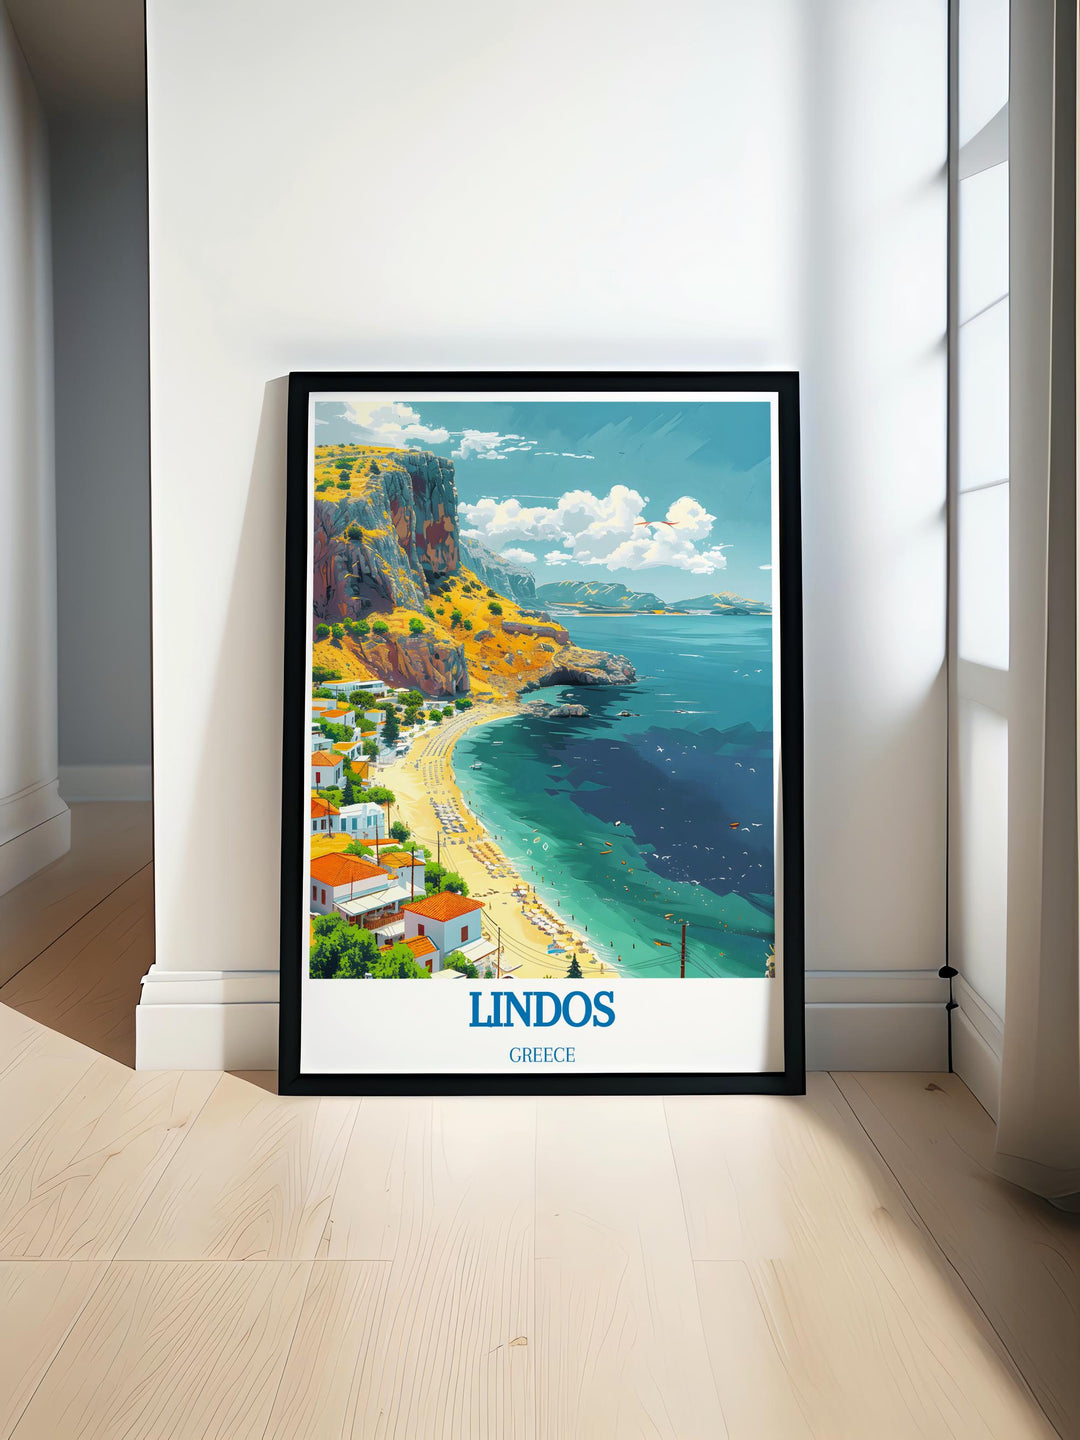 Modern wall decor featuring Lindos, perfect for adding a contemporary Greek touch to any room.